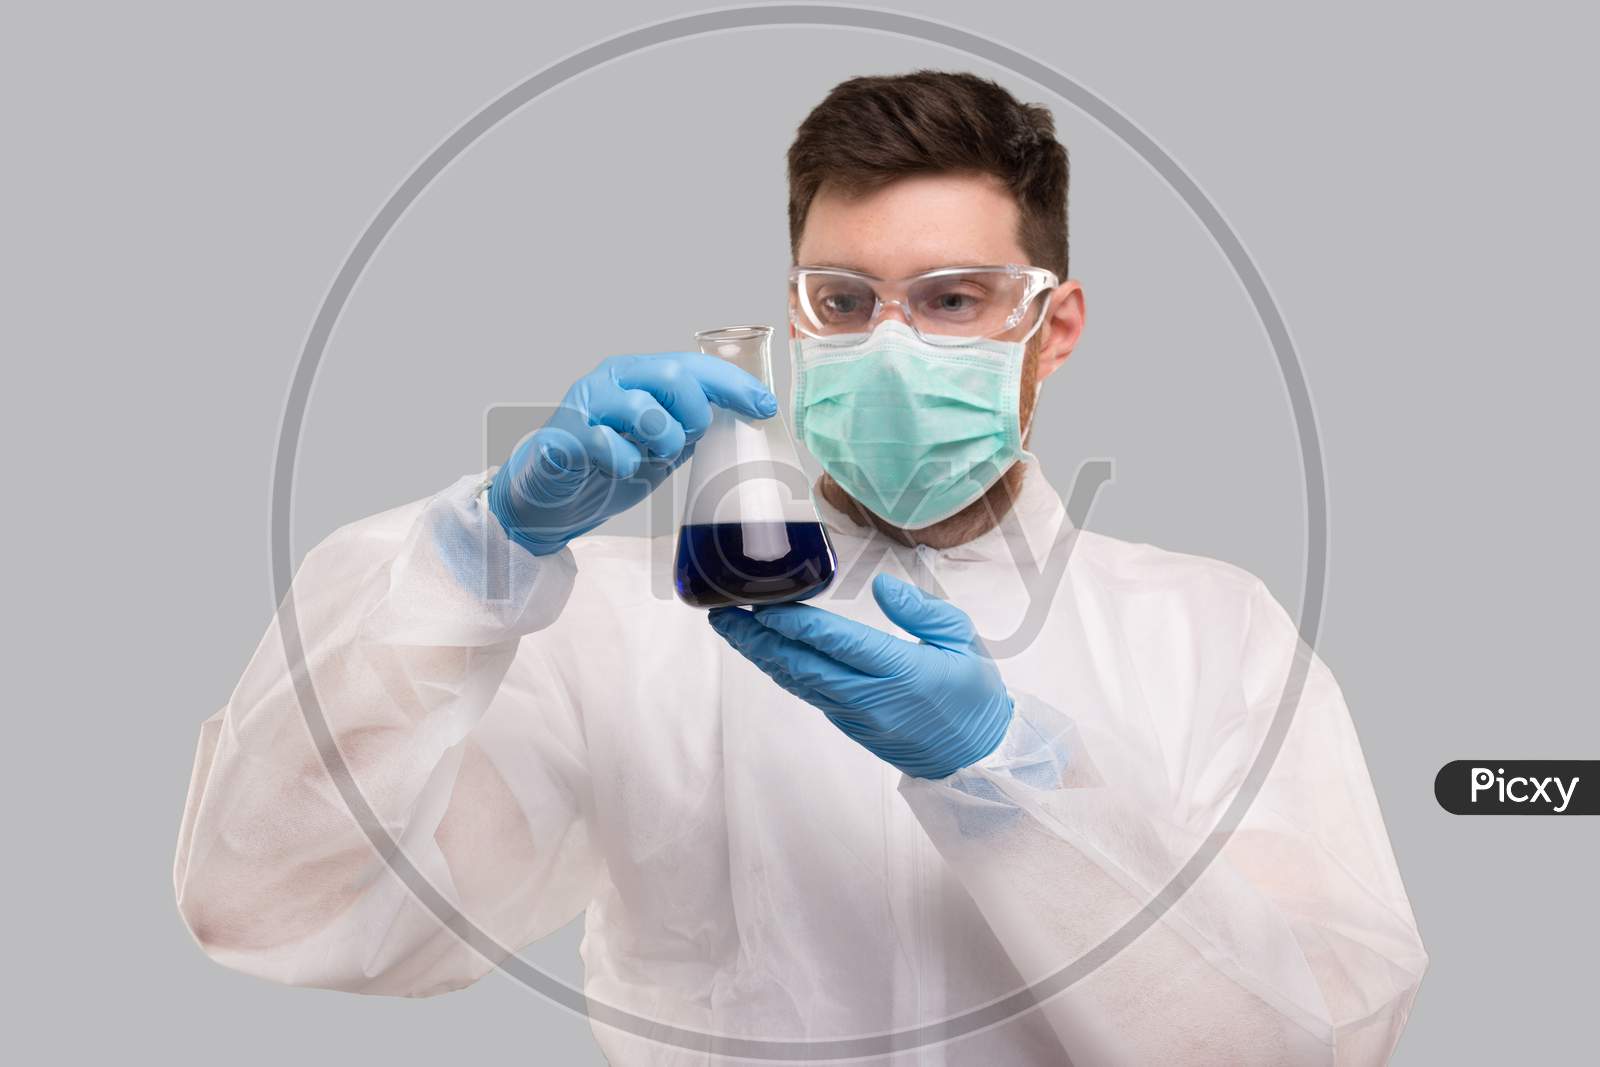 Male Laboratory Worker In Chemical Suit, Wearing Medical Mask And Glasses Watching Flask With Colorfull Liquid. Science, Medical, Virus Concept. Blue Liquid